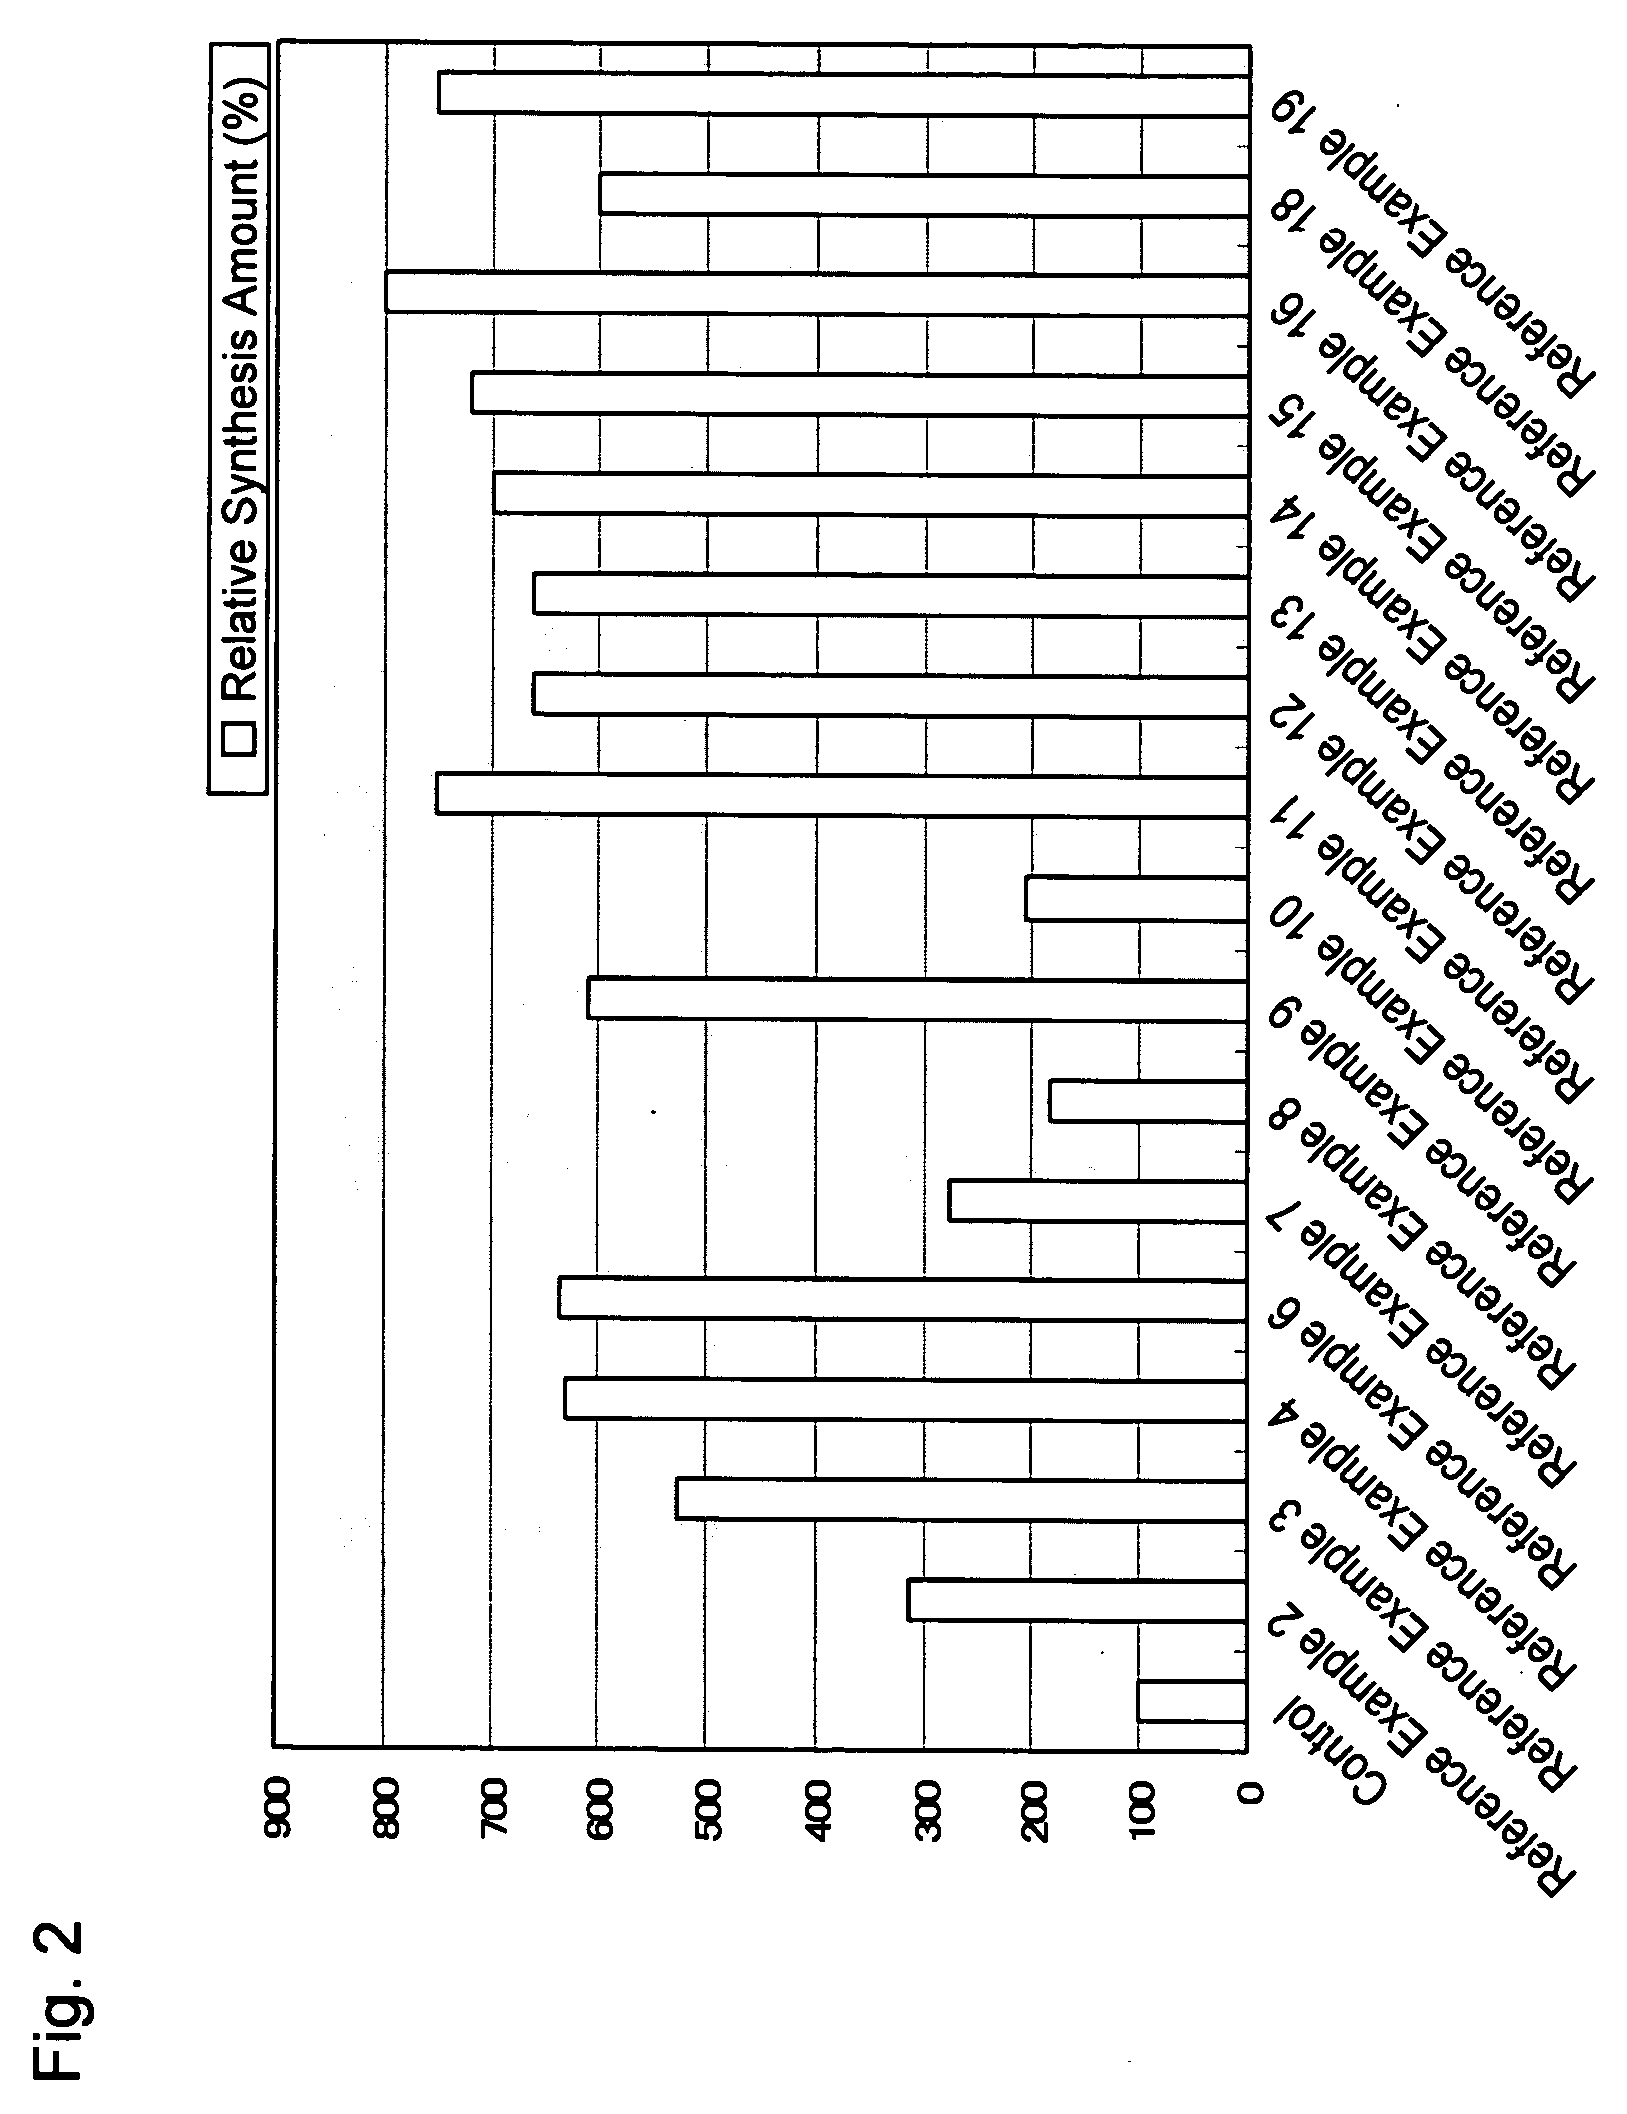 DNA fragment to promote translation reaction and method for cell-free protein synthesis system using the same